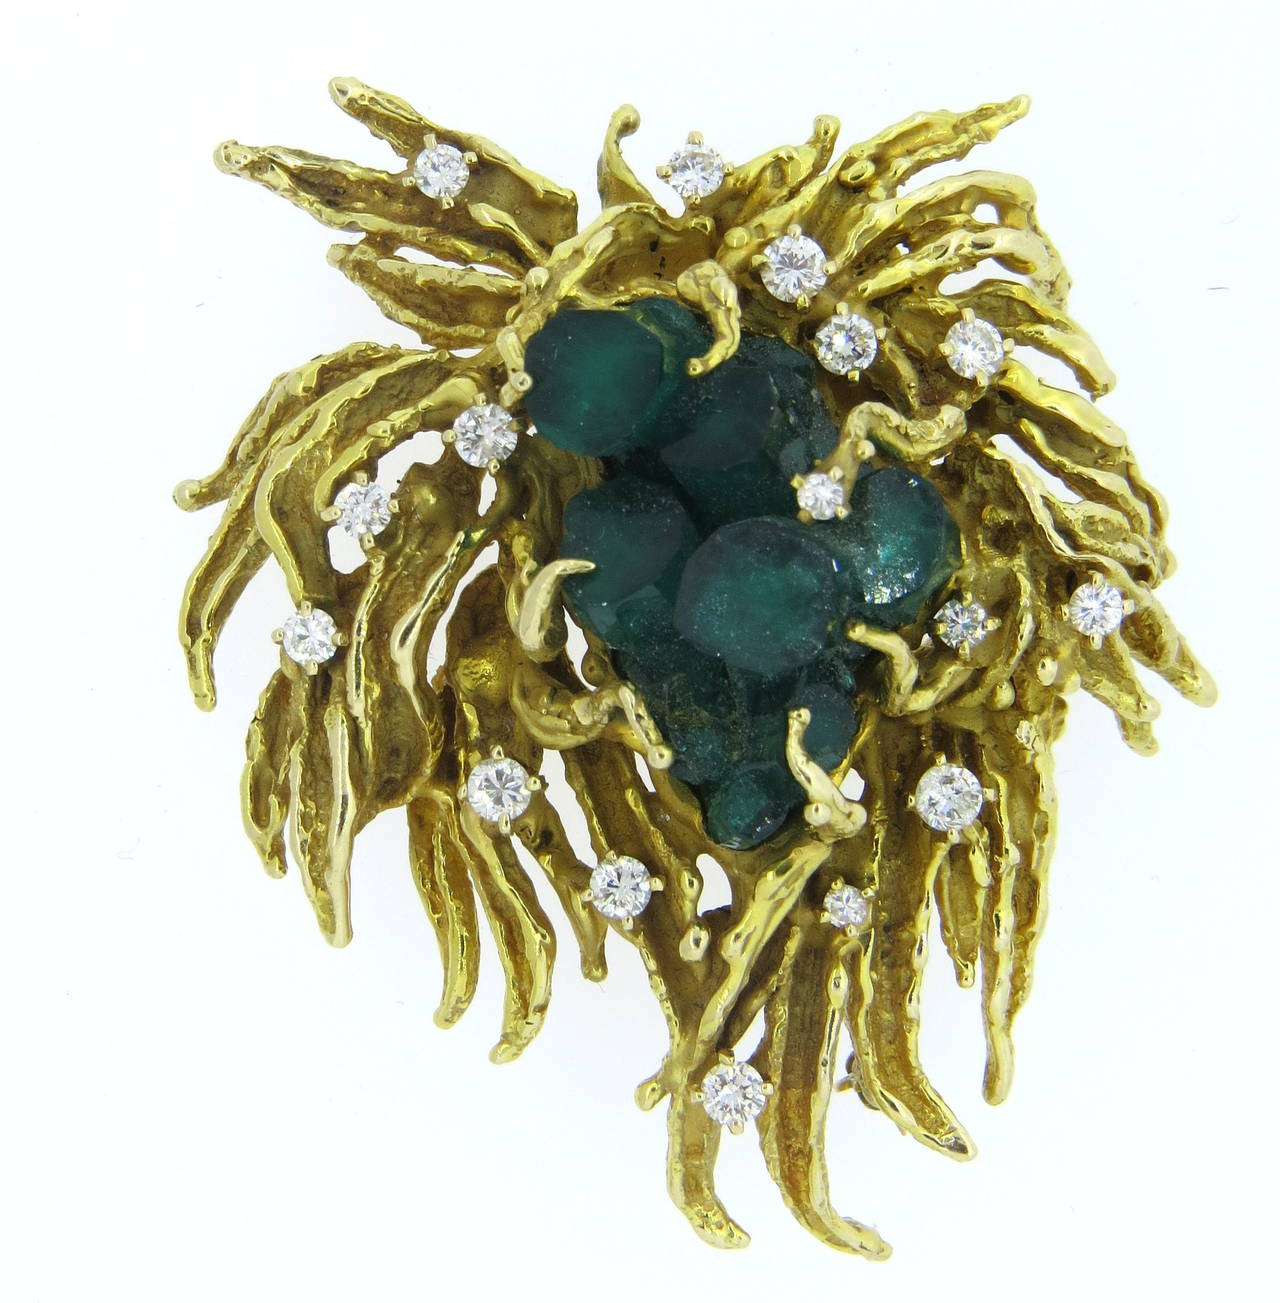 Large 14k gold brooch, set with Chatham emeralds and approx. 0.75ctw in diamonds. Brooch measures 56mm x 45mm. Weight of the piece - 43.5 grams